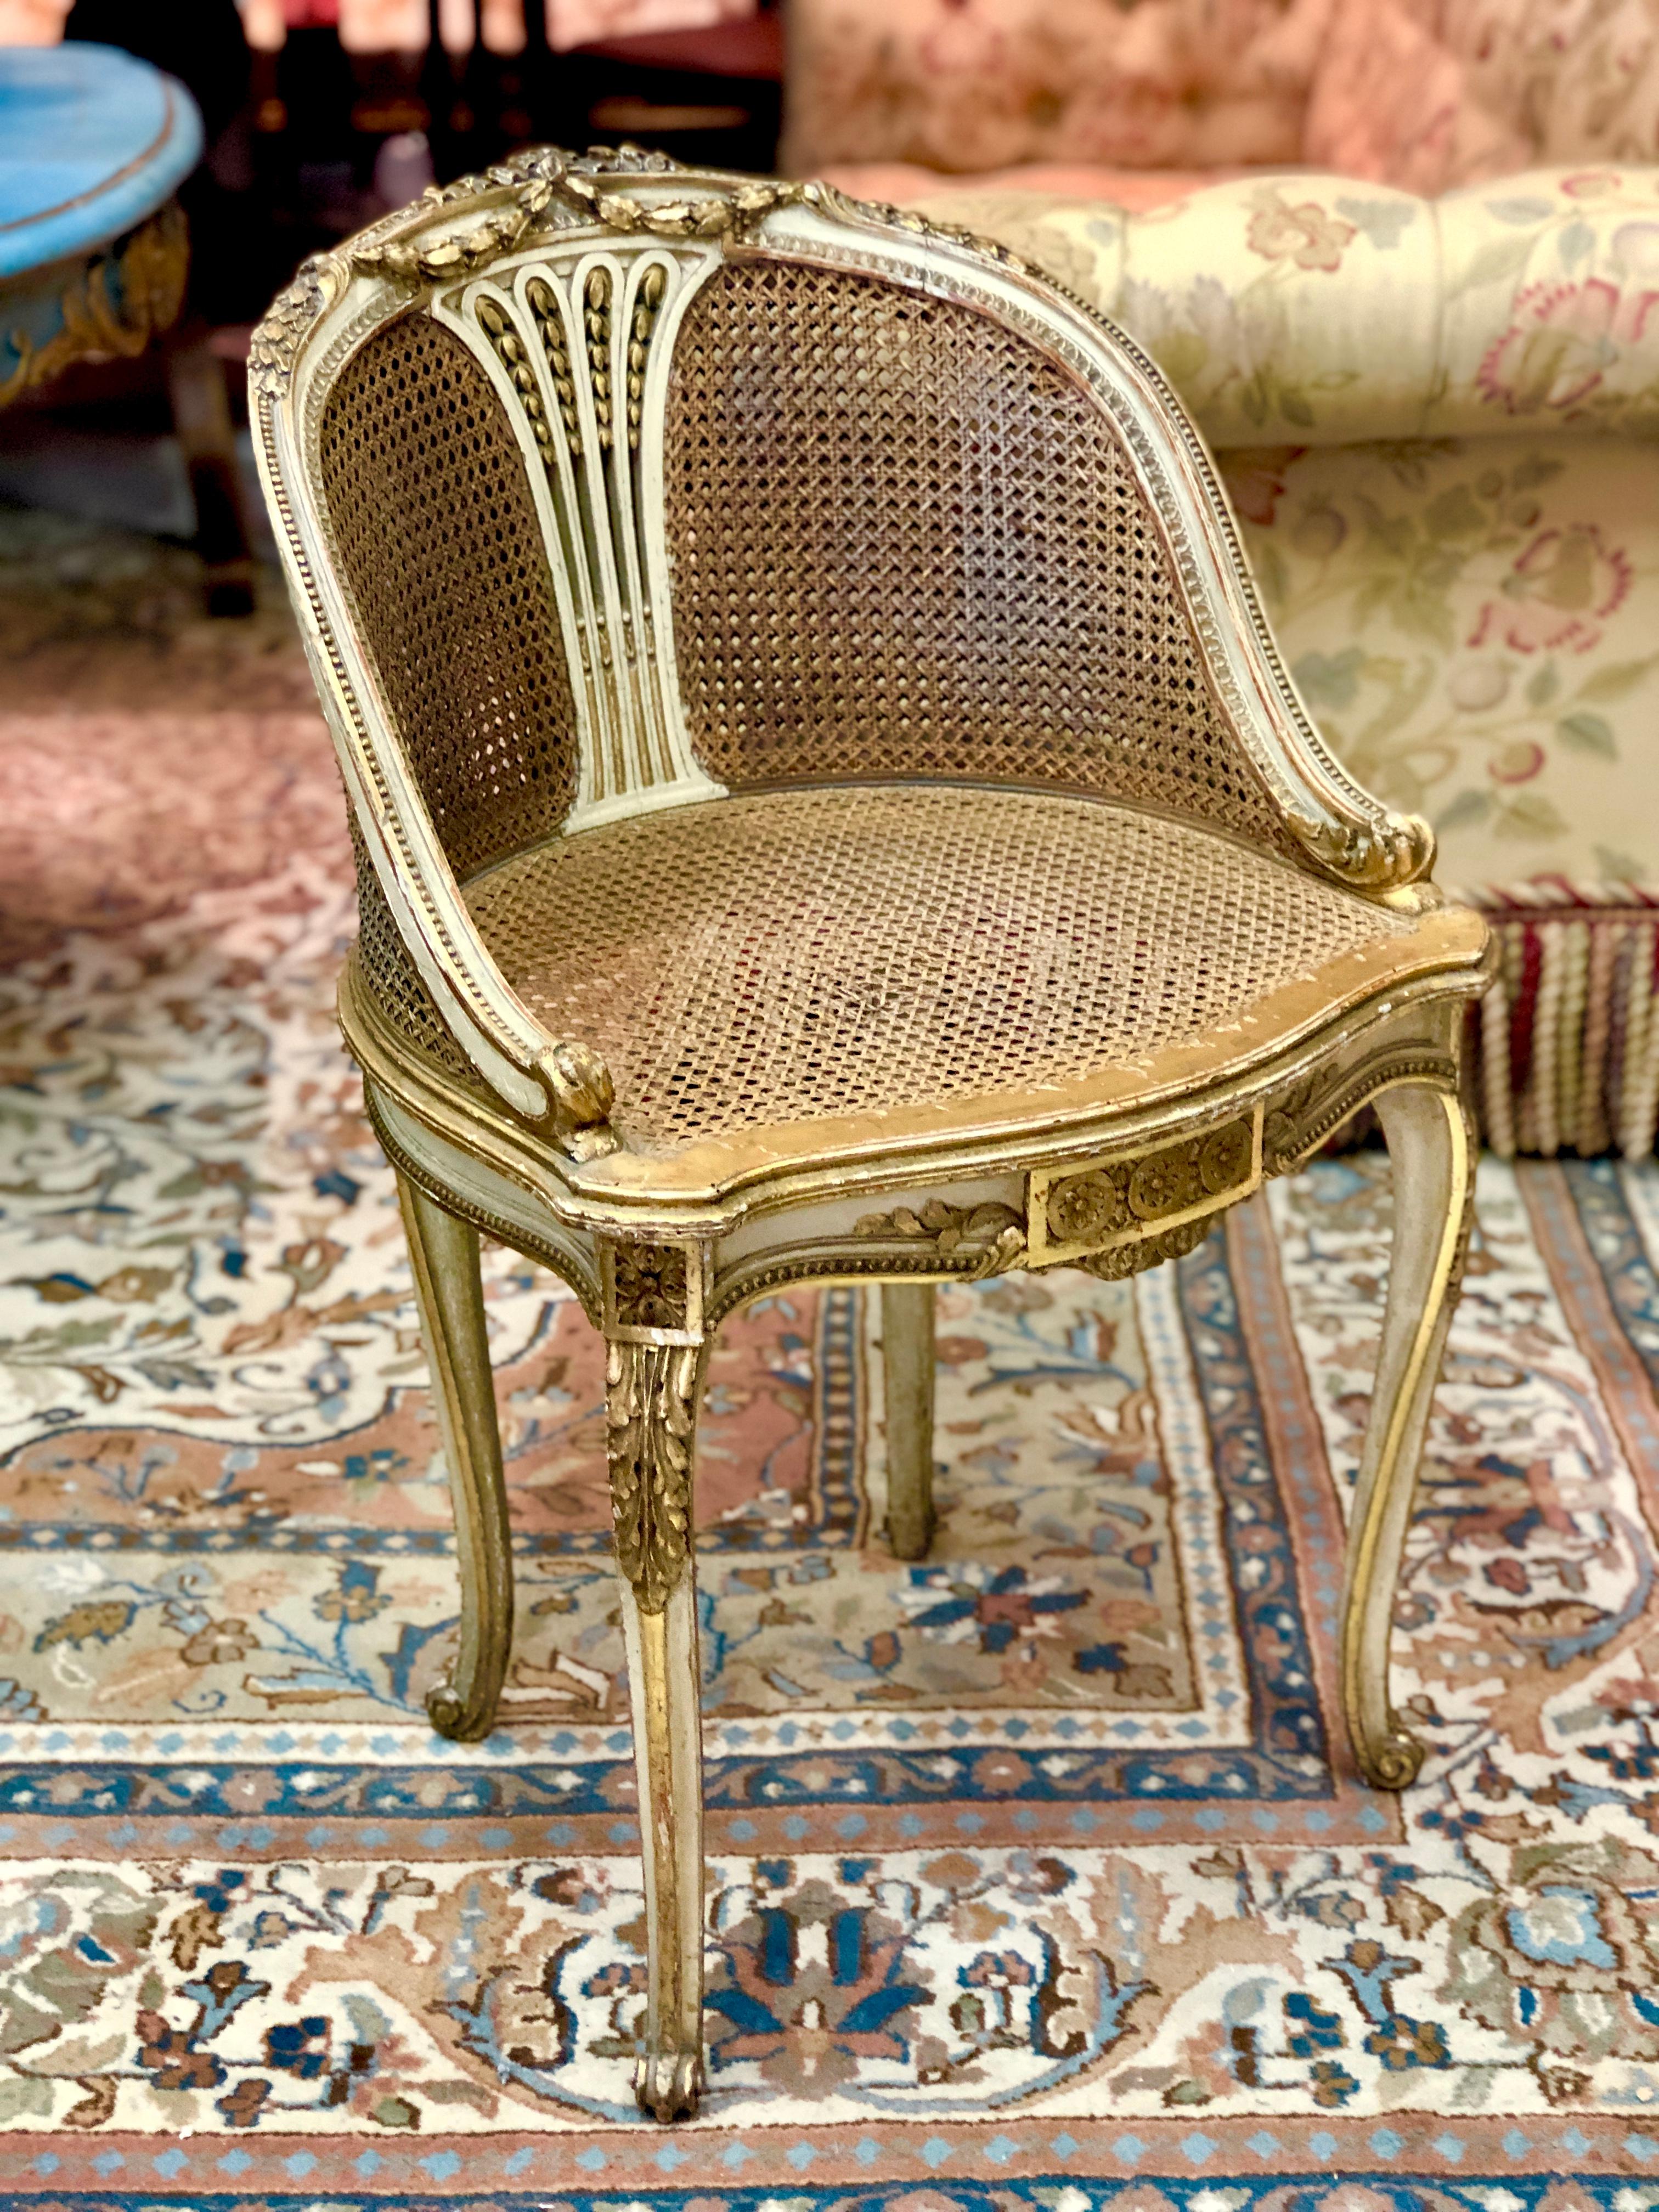 Petite French ballroom round chair, in Louis XVI style having a giltwood round hand carved frame with cane back and the seat. Very good condition.
France, circa 1870.
 